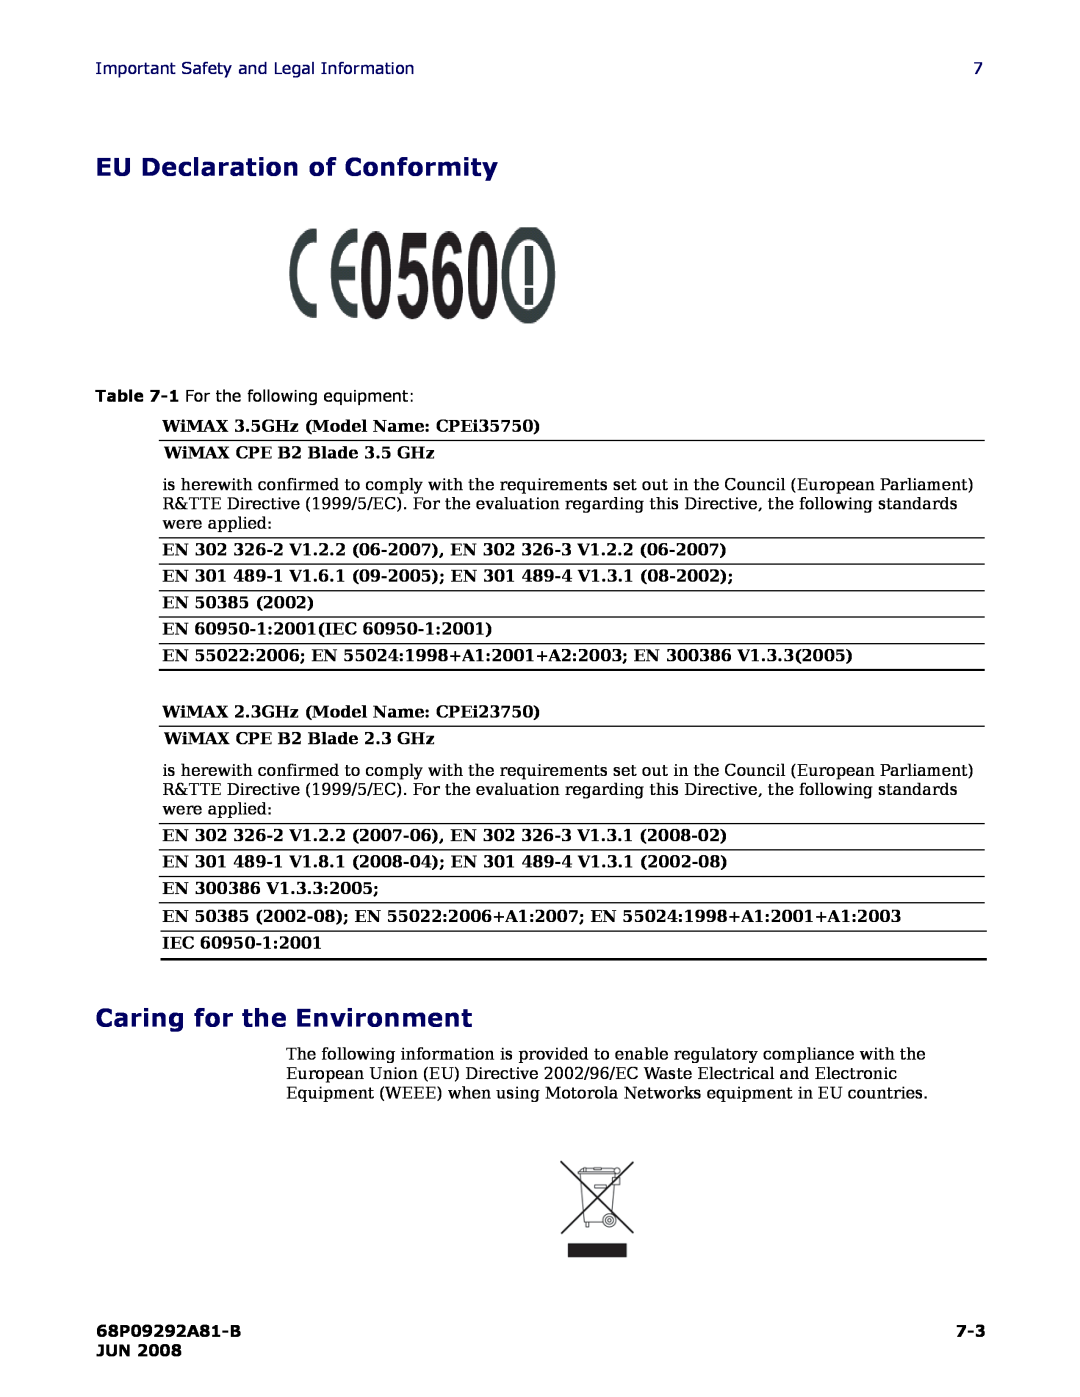 Motorola CPEI 750 manual EU Declaration of Conformity, Caring for the Environment, Important Safety and Legal Information 